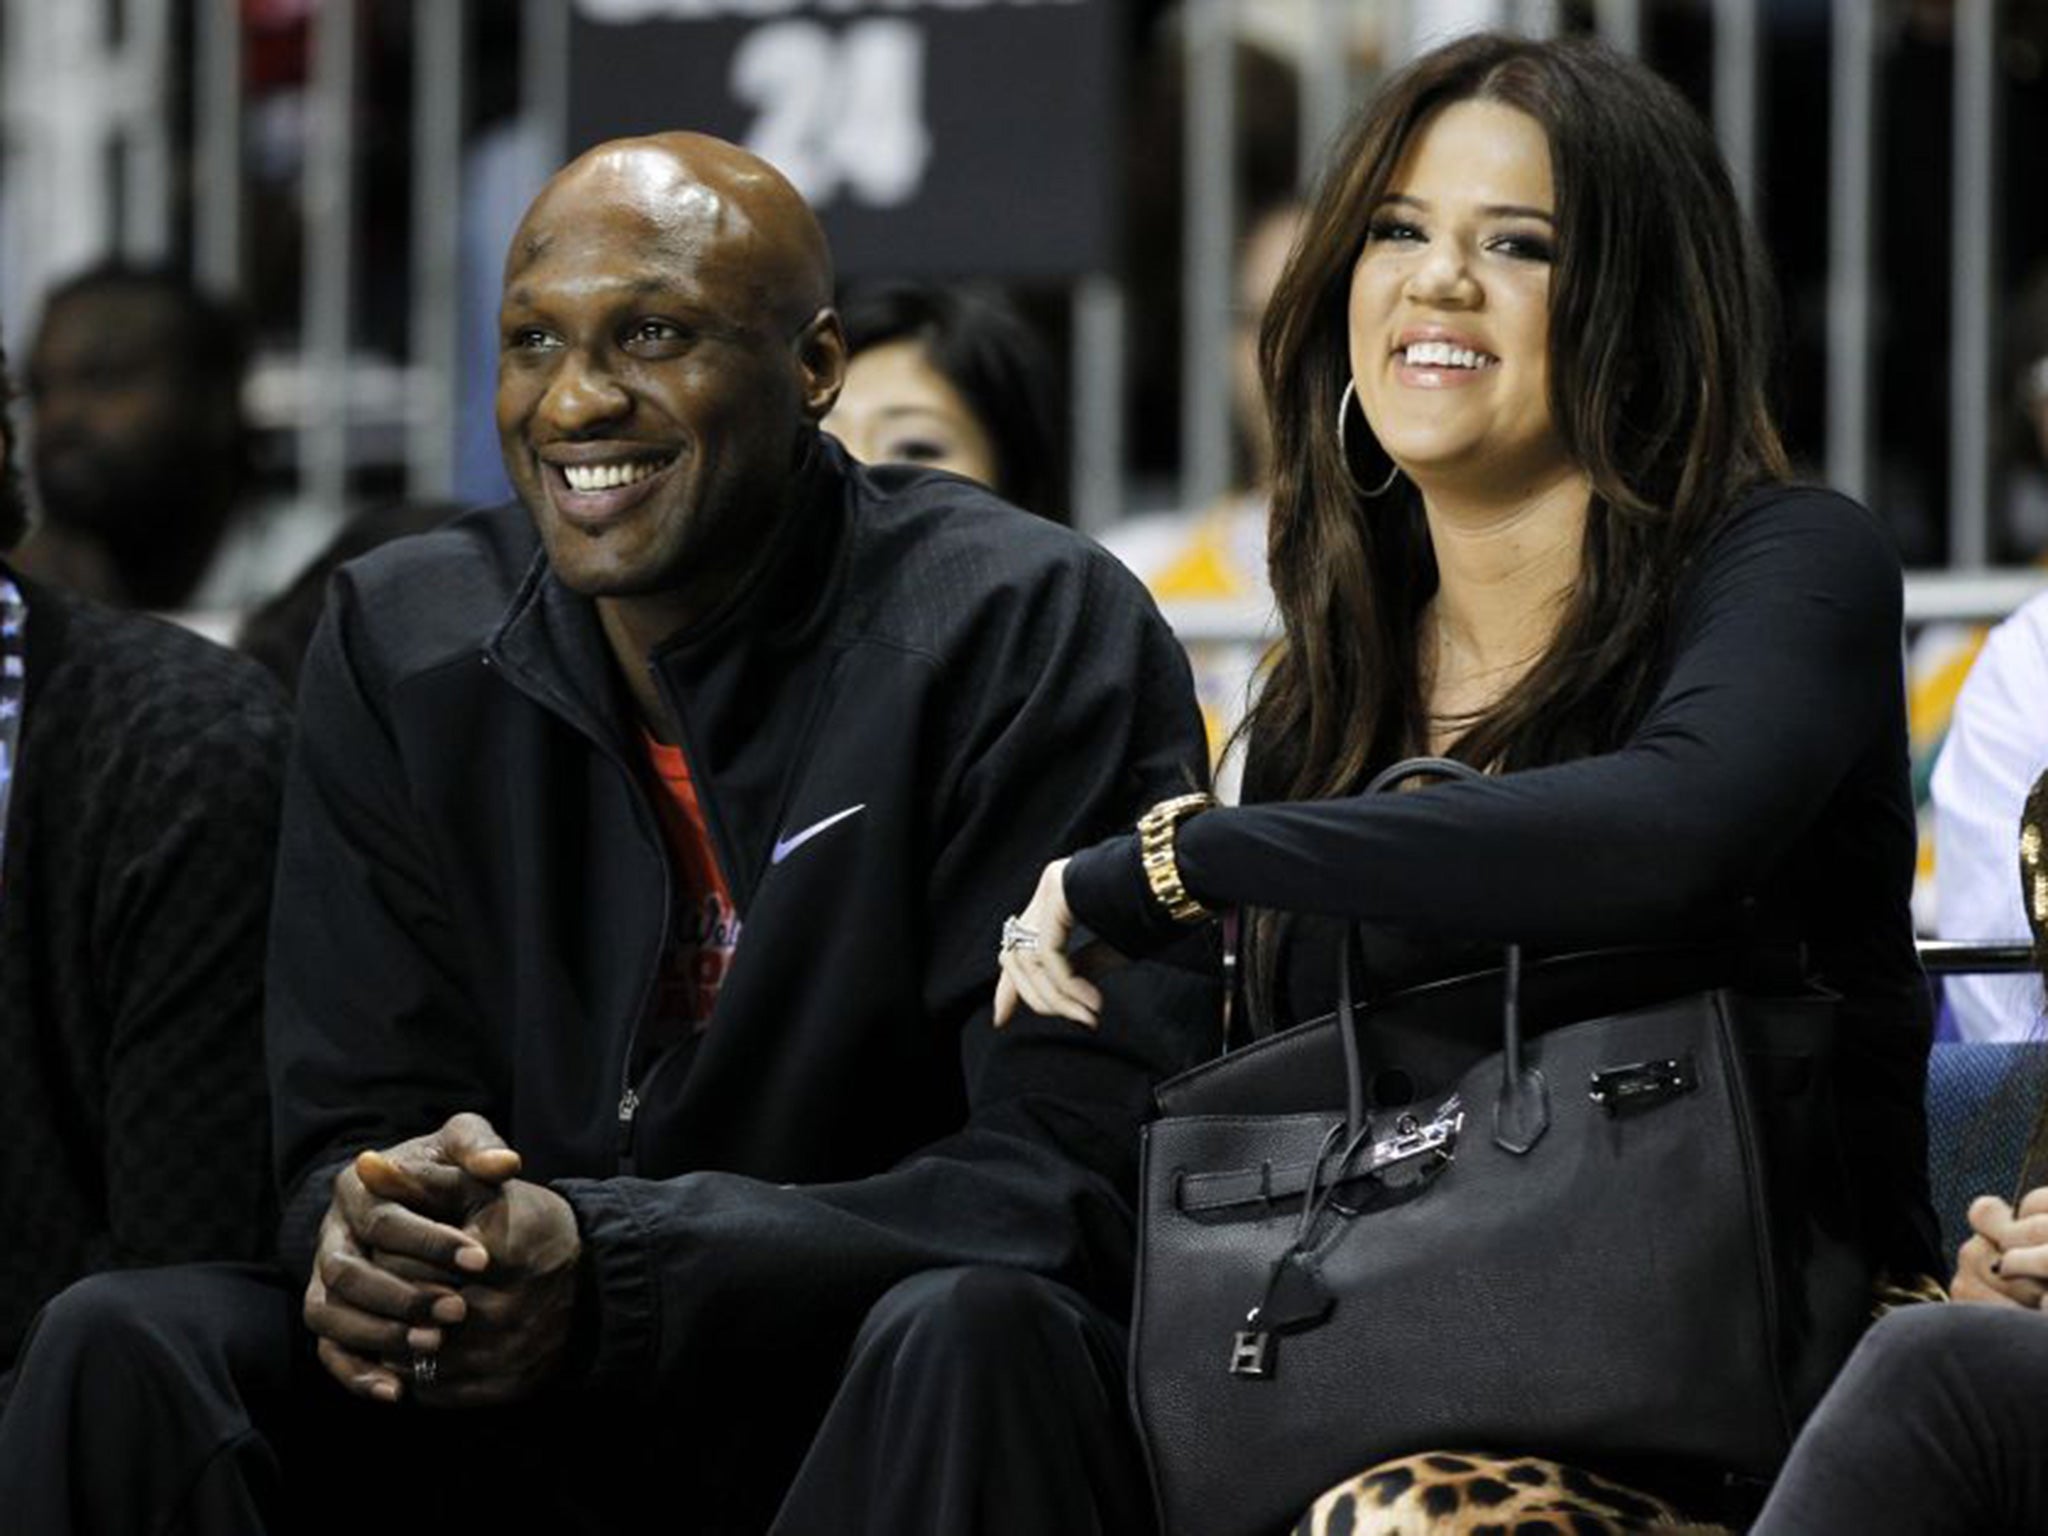 Lamar Odom was caught up in the reality tv circus with ex-wife Khloé Kardashian